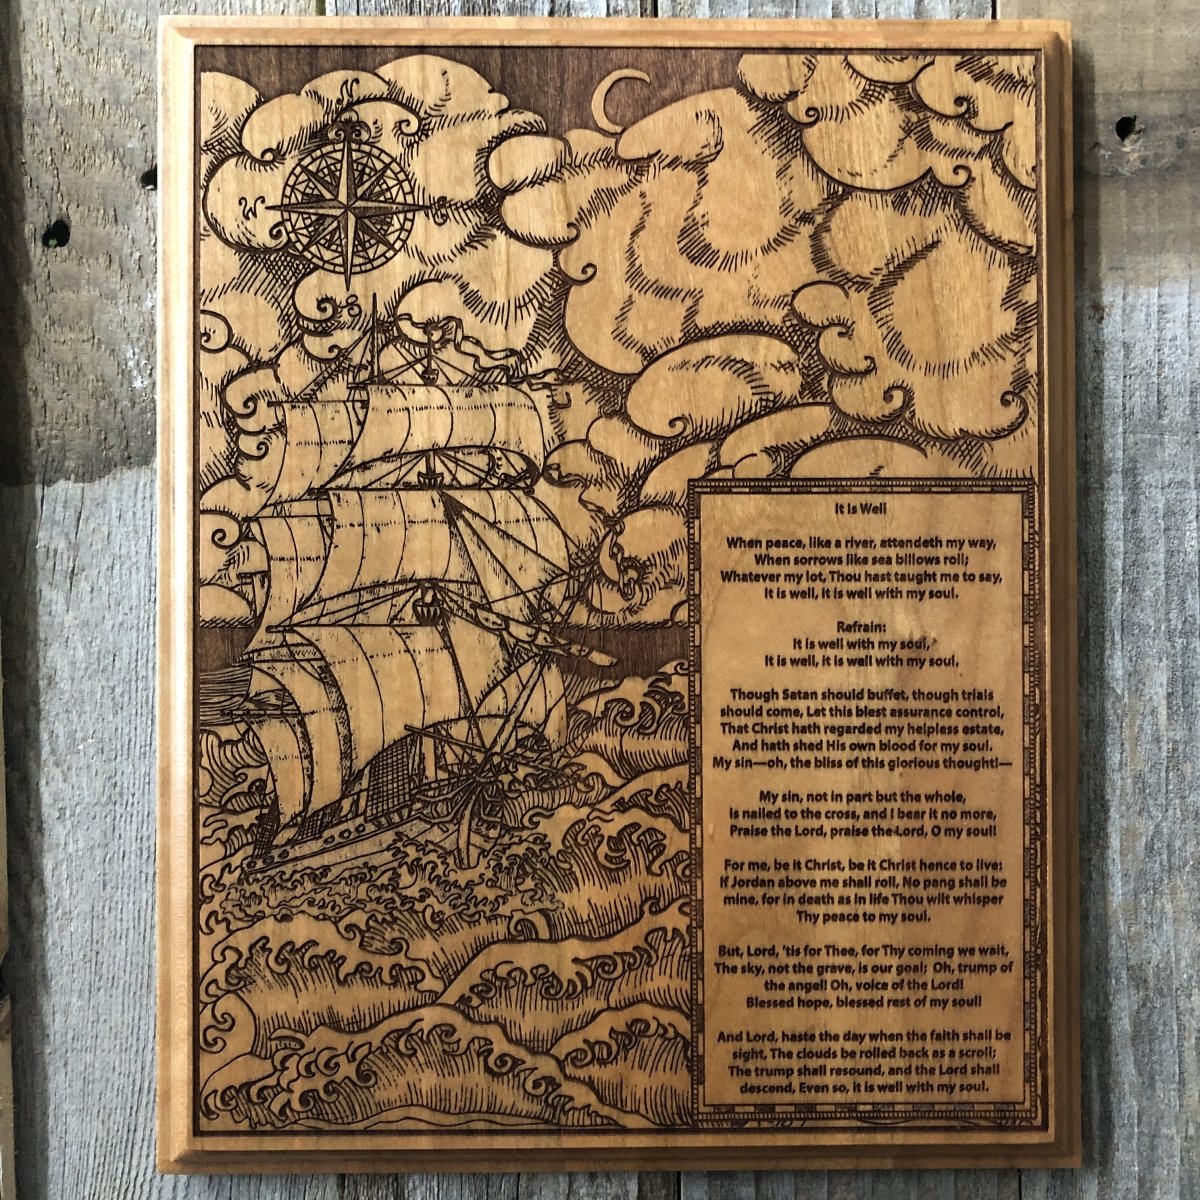 Engravedwood - It Is Well - Engraved Wood Art - The Reformed Sage - #reformed# - #reformed_gifts# - #christian_gifts#